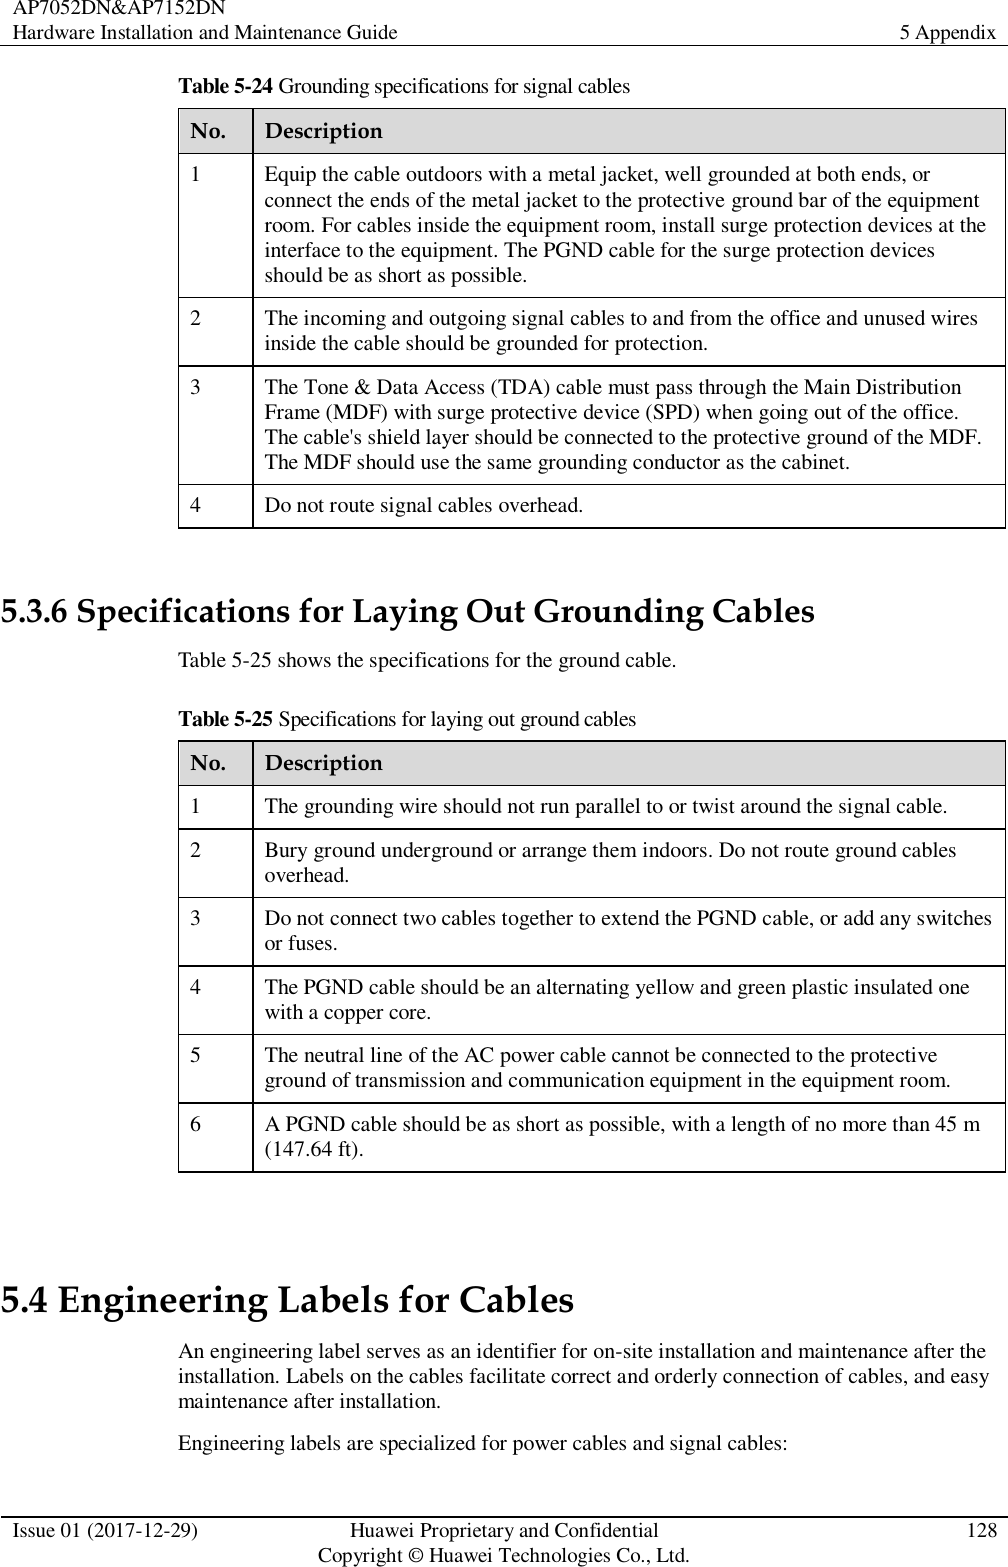 AP7052DN&amp;AP7152DN Hardware Installation and Maintenance Guide 5 Appendix  Issue 01 (2017-12-29) Huawei Proprietary and Confidential                                     Copyright © Huawei Technologies Co., Ltd. 128  Table 5-24 Grounding specifications for signal cables No. Description 1 Equip the cable outdoors with a metal jacket, well grounded at both ends, or connect the ends of the metal jacket to the protective ground bar of the equipment room. For cables inside the equipment room, install surge protection devices at the interface to the equipment. The PGND cable for the surge protection devices should be as short as possible. 2 The incoming and outgoing signal cables to and from the office and unused wires inside the cable should be grounded for protection. 3 The Tone &amp; Data Access (TDA) cable must pass through the Main Distribution Frame (MDF) with surge protective device (SPD) when going out of the office. The cable&apos;s shield layer should be connected to the protective ground of the MDF. The MDF should use the same grounding conductor as the cabinet. 4 Do not route signal cables overhead.  5.3.6 Specifications for Laying Out Grounding Cables Table 5-25 shows the specifications for the ground cable. Table 5-25 Specifications for laying out ground cables No. Description 1 The grounding wire should not run parallel to or twist around the signal cable. 2 Bury ground underground or arrange them indoors. Do not route ground cables overhead. 3 Do not connect two cables together to extend the PGND cable, or add any switches or fuses. 4 The PGND cable should be an alternating yellow and green plastic insulated one with a copper core. 5 The neutral line of the AC power cable cannot be connected to the protective ground of transmission and communication equipment in the equipment room. 6 A PGND cable should be as short as possible, with a length of no more than 45 m (147.64 ft).  5.4 Engineering Labels for Cables An engineering label serves as an identifier for on-site installation and maintenance after the installation. Labels on the cables facilitate correct and orderly connection of cables, and easy maintenance after installation. Engineering labels are specialized for power cables and signal cables: 